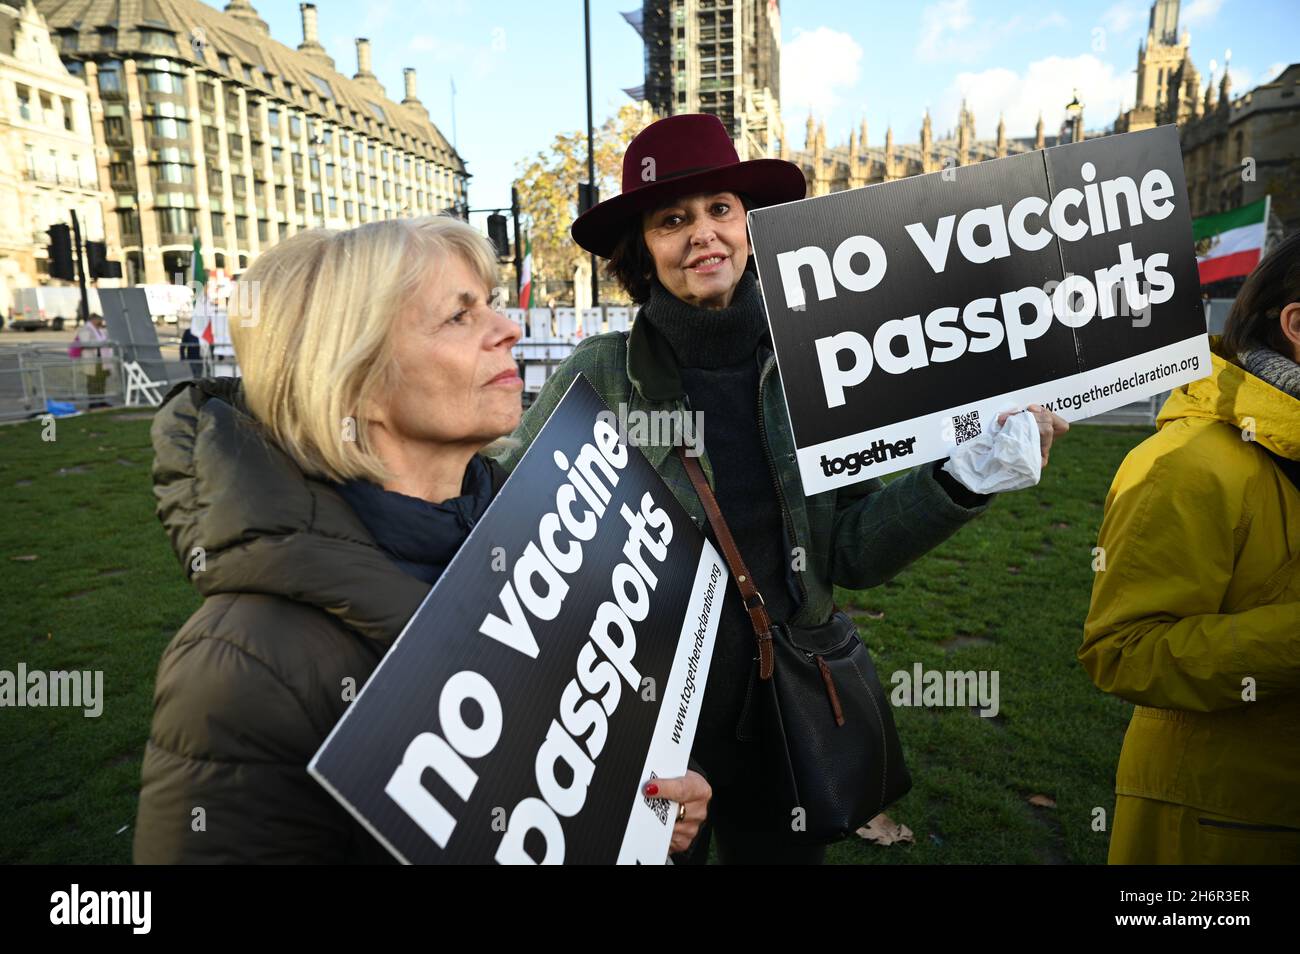 London, UK. 17 November 2021, MP support, people should have Freedom of Choice against Vaccine Passports - No jab, no job, No jab, no travel is totall wrong against fundamental human rights in Parliament Square, 17 November 2021, London, UK. Stock Photo